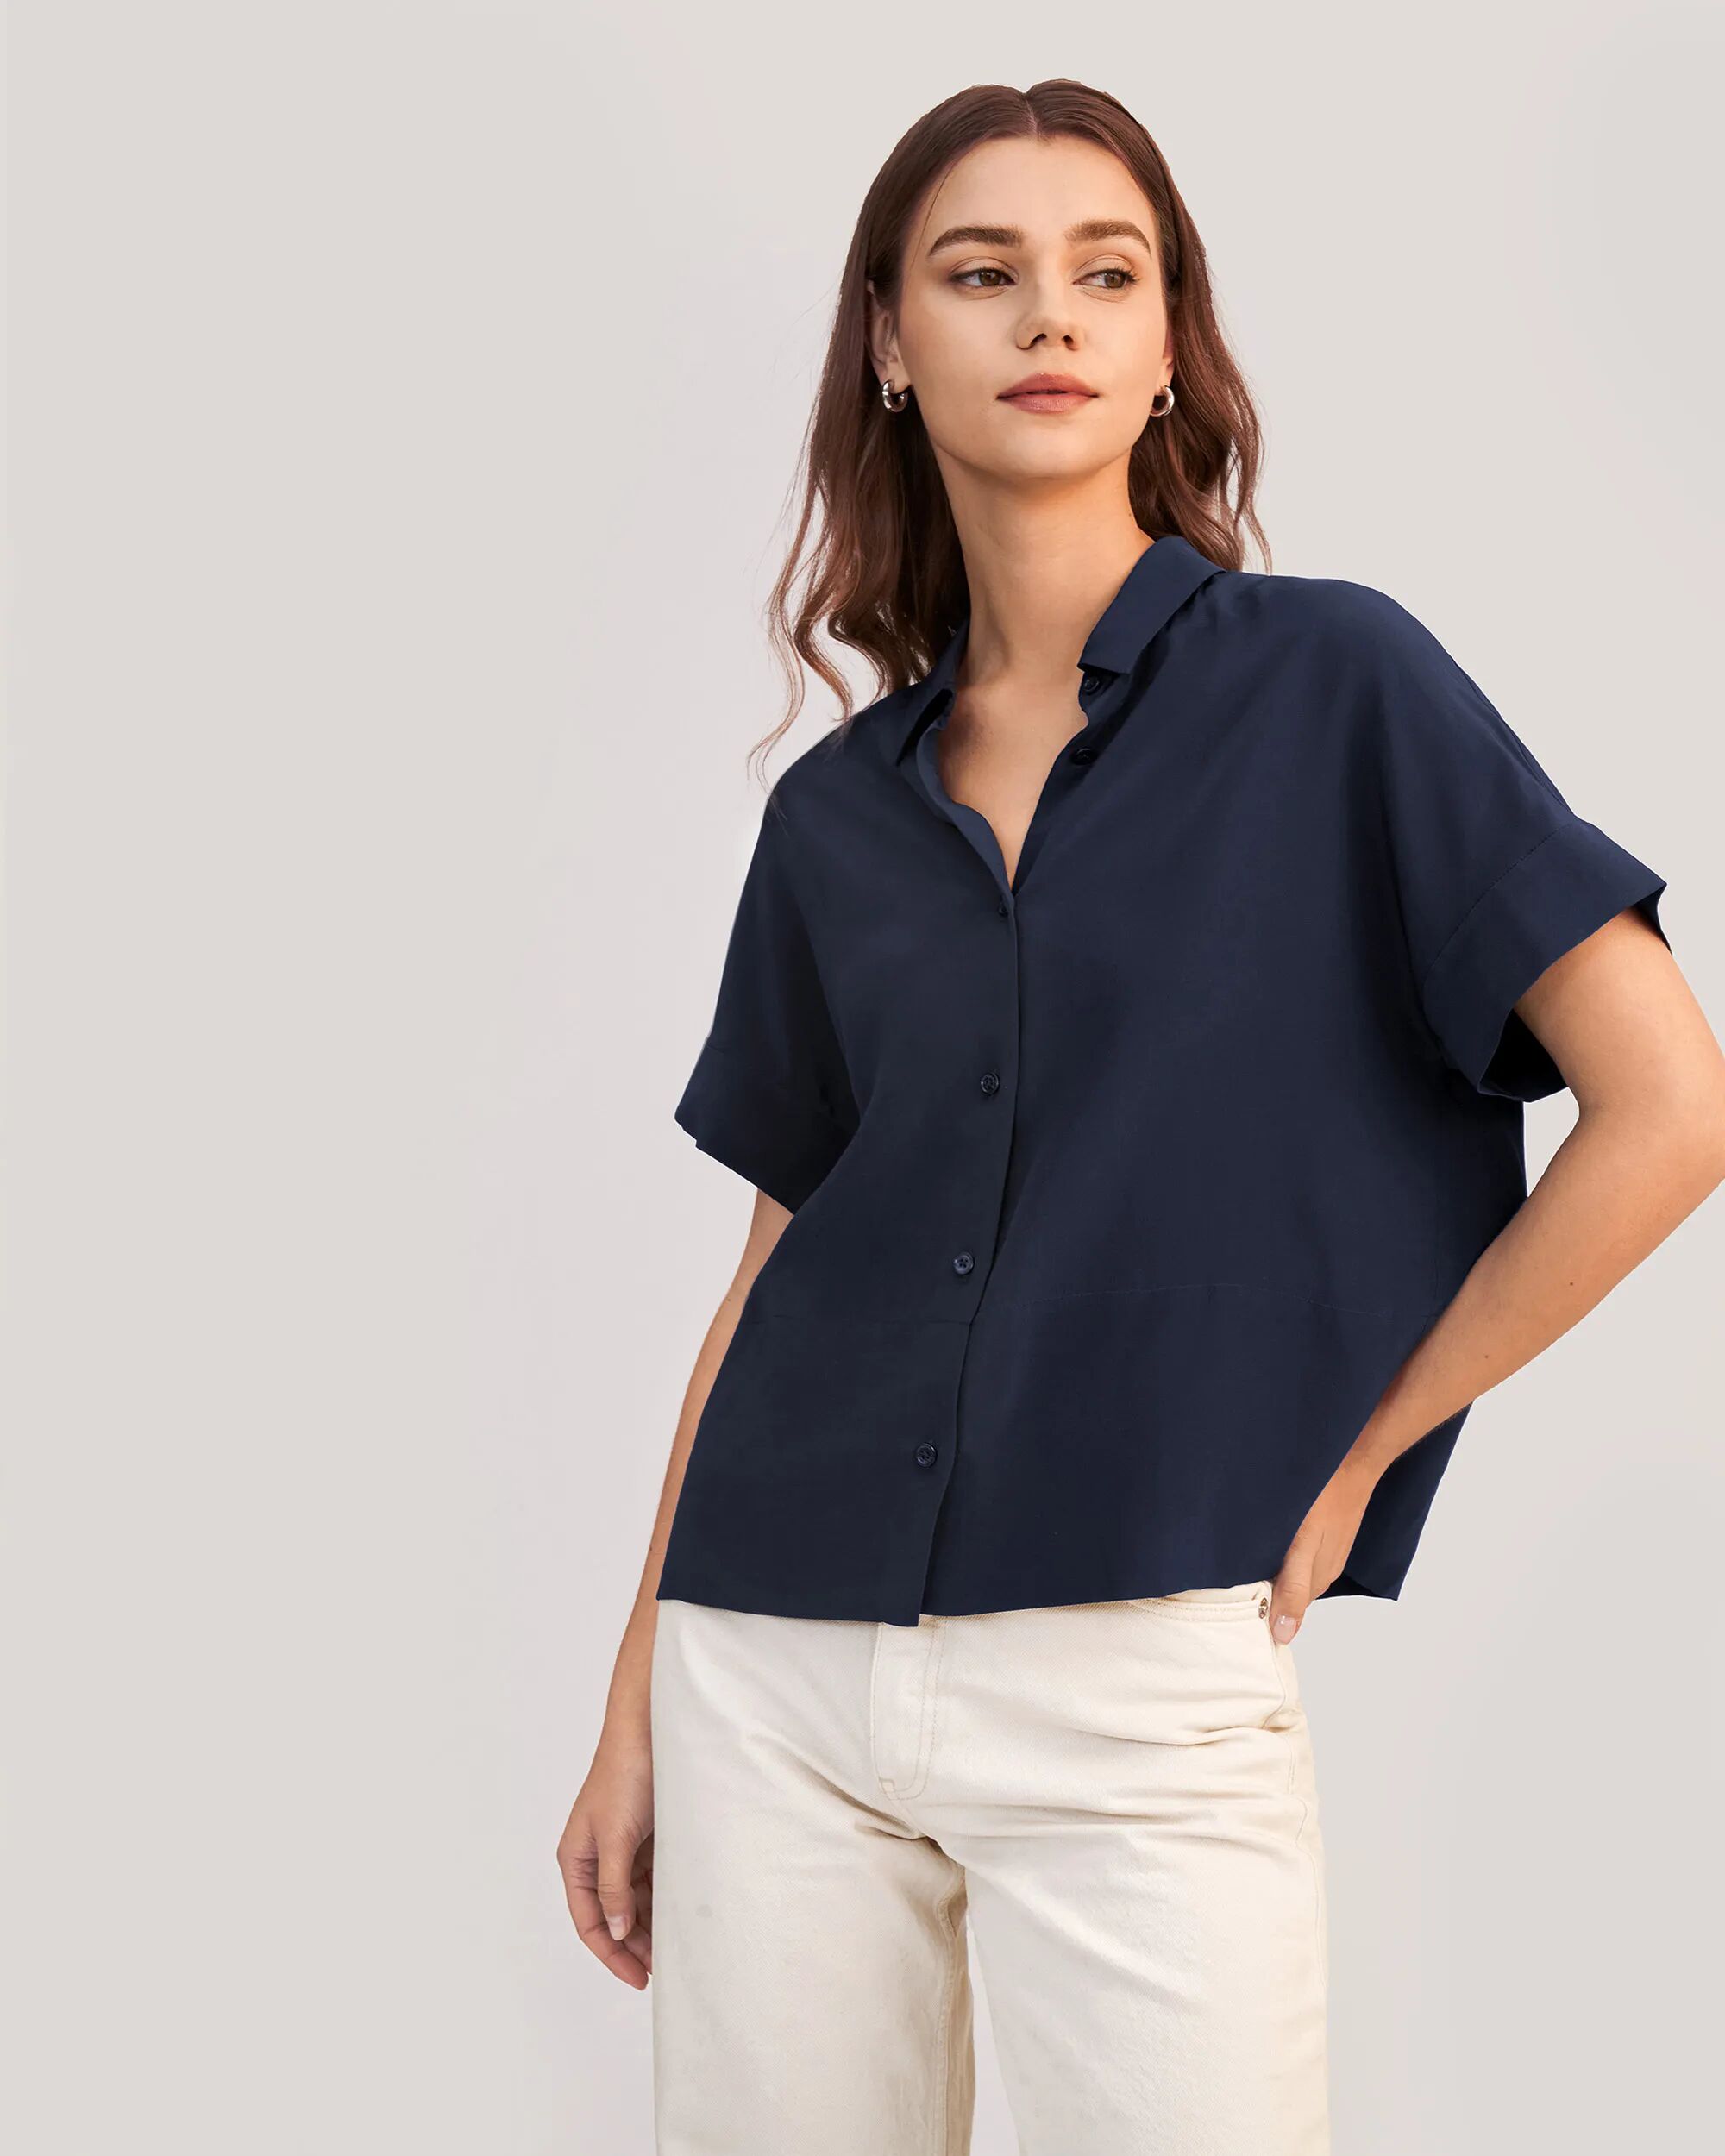 LILYSILK Casual Blue Short Sleeve Button Up Shirt   Silk Down Sleeves Style Business   Silk Tops Women Navy 18 Momme silk Classic Light And Soft L